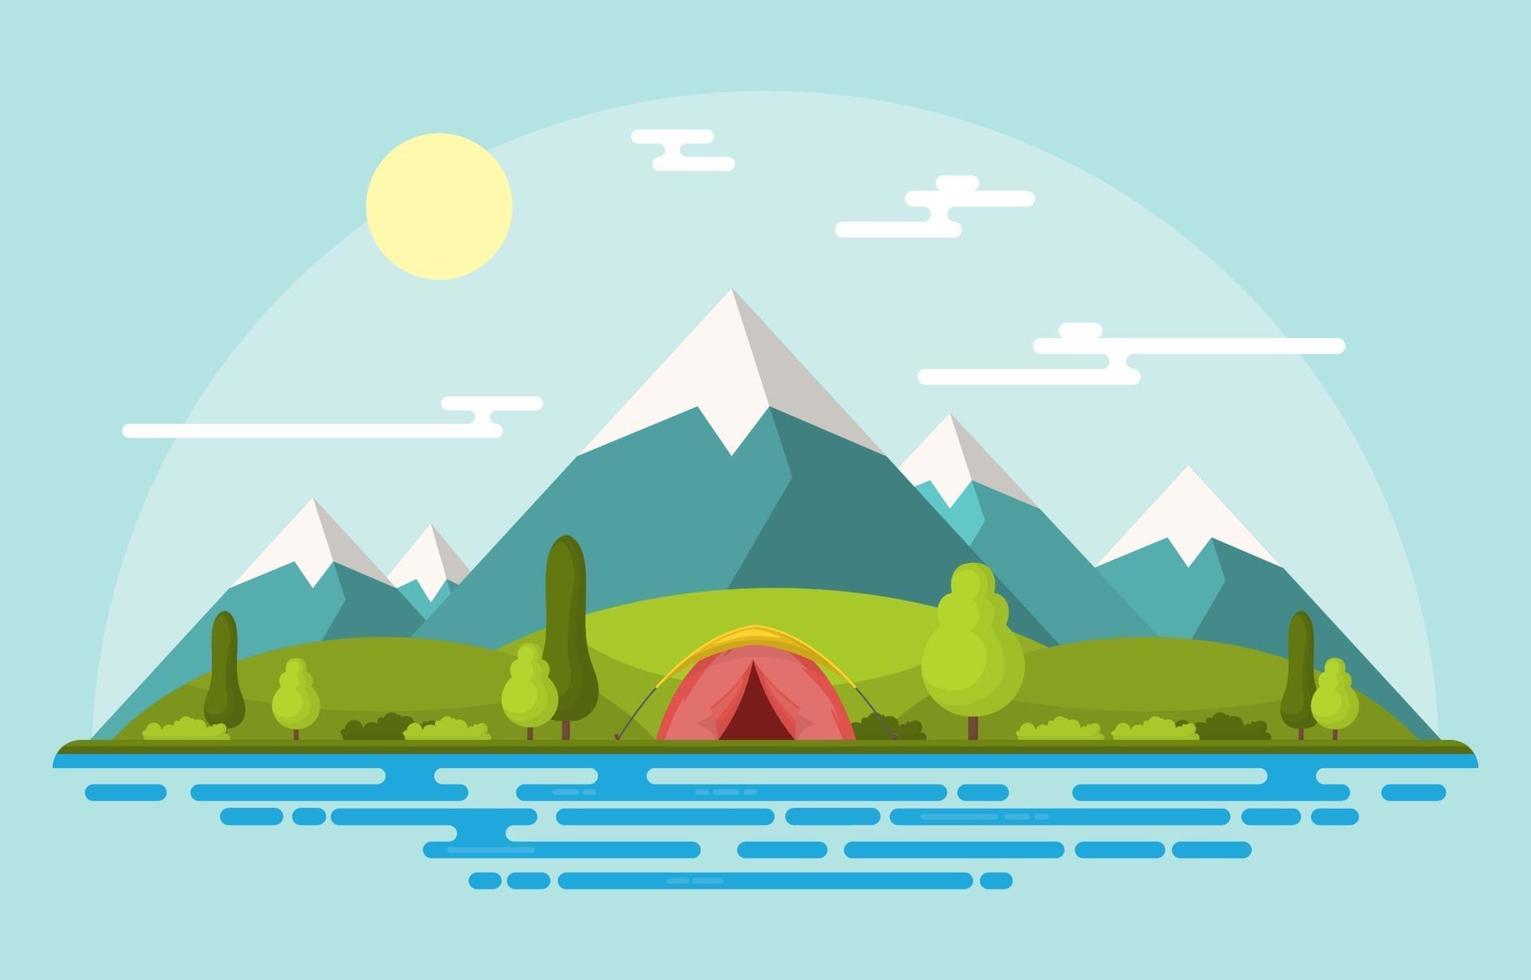 Camping Tent in the Mountains on a Sunny Day vector